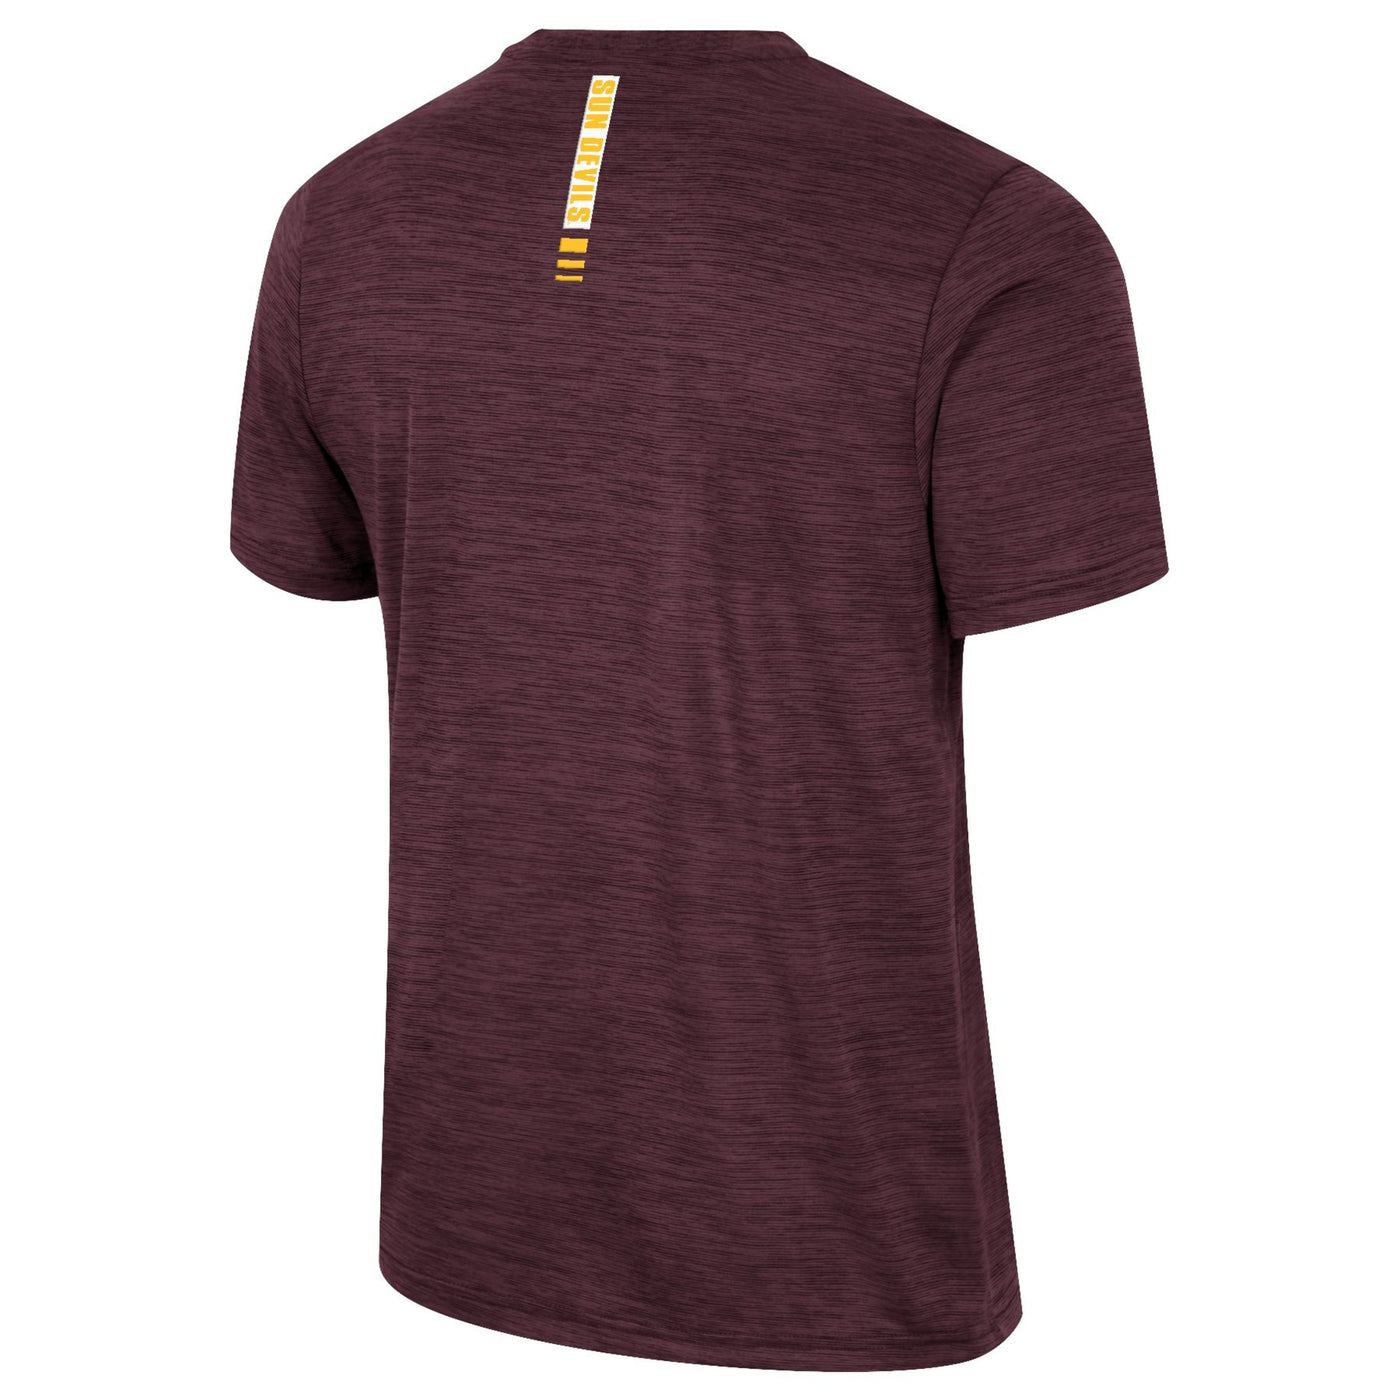 Backside of ASU maroon athletic t-shirt with 